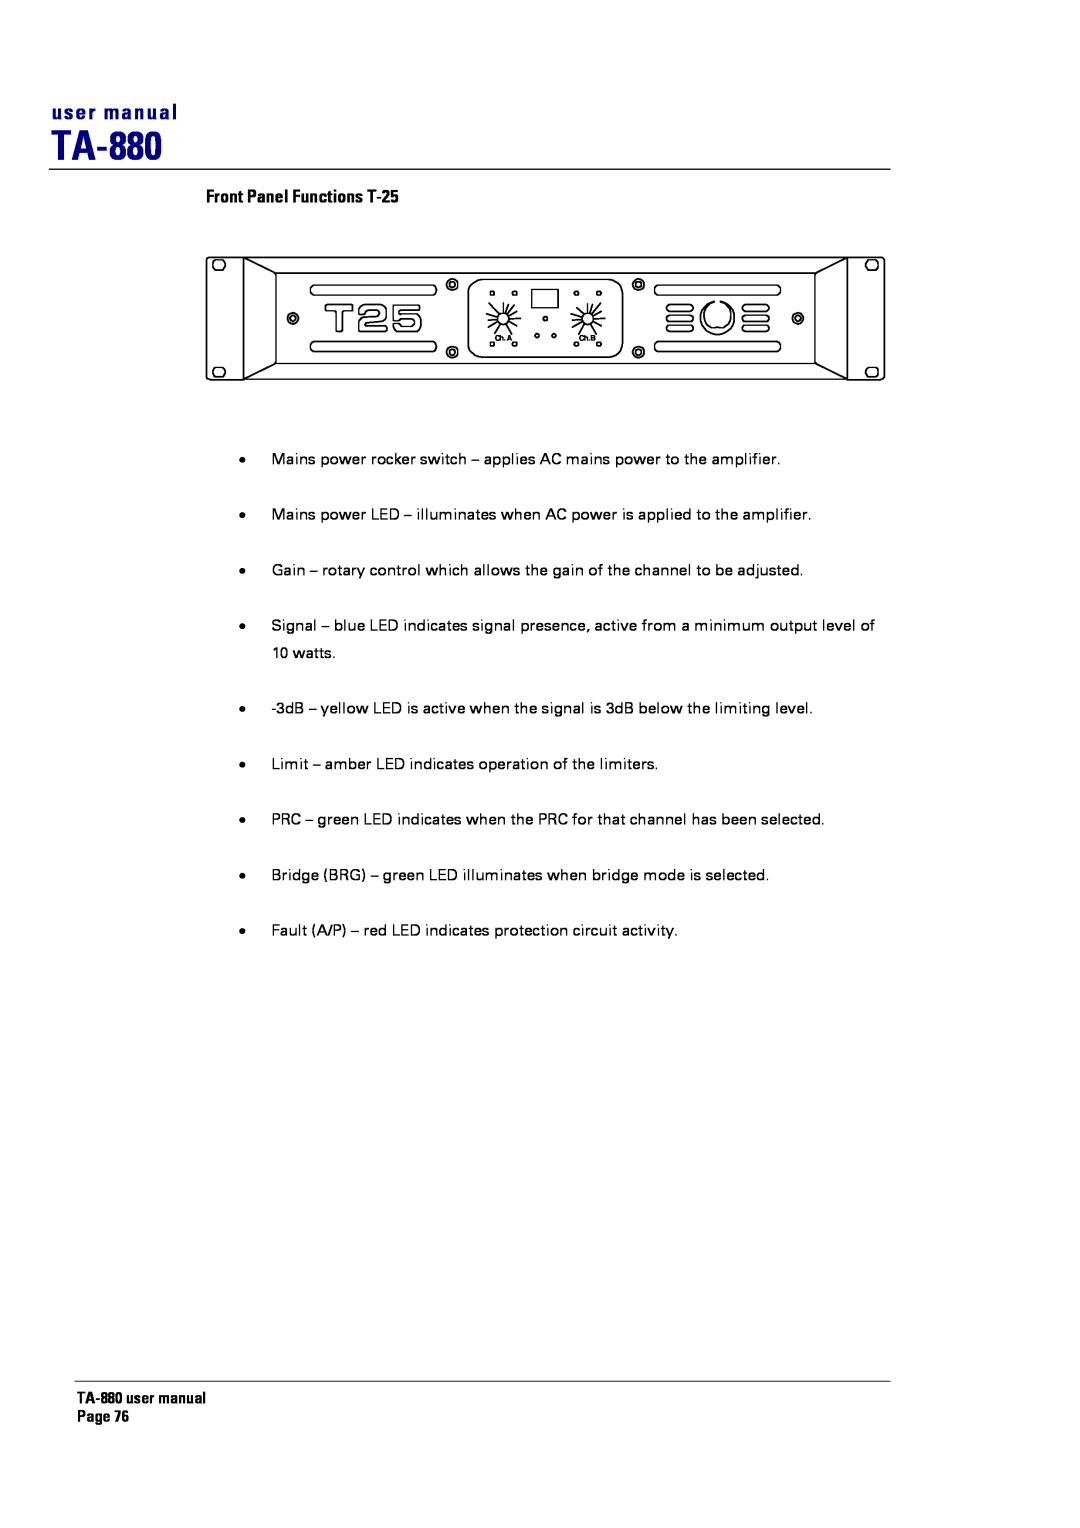 Turbosound TA-880 user manual Front Panel Functions T-25, Ch. A 